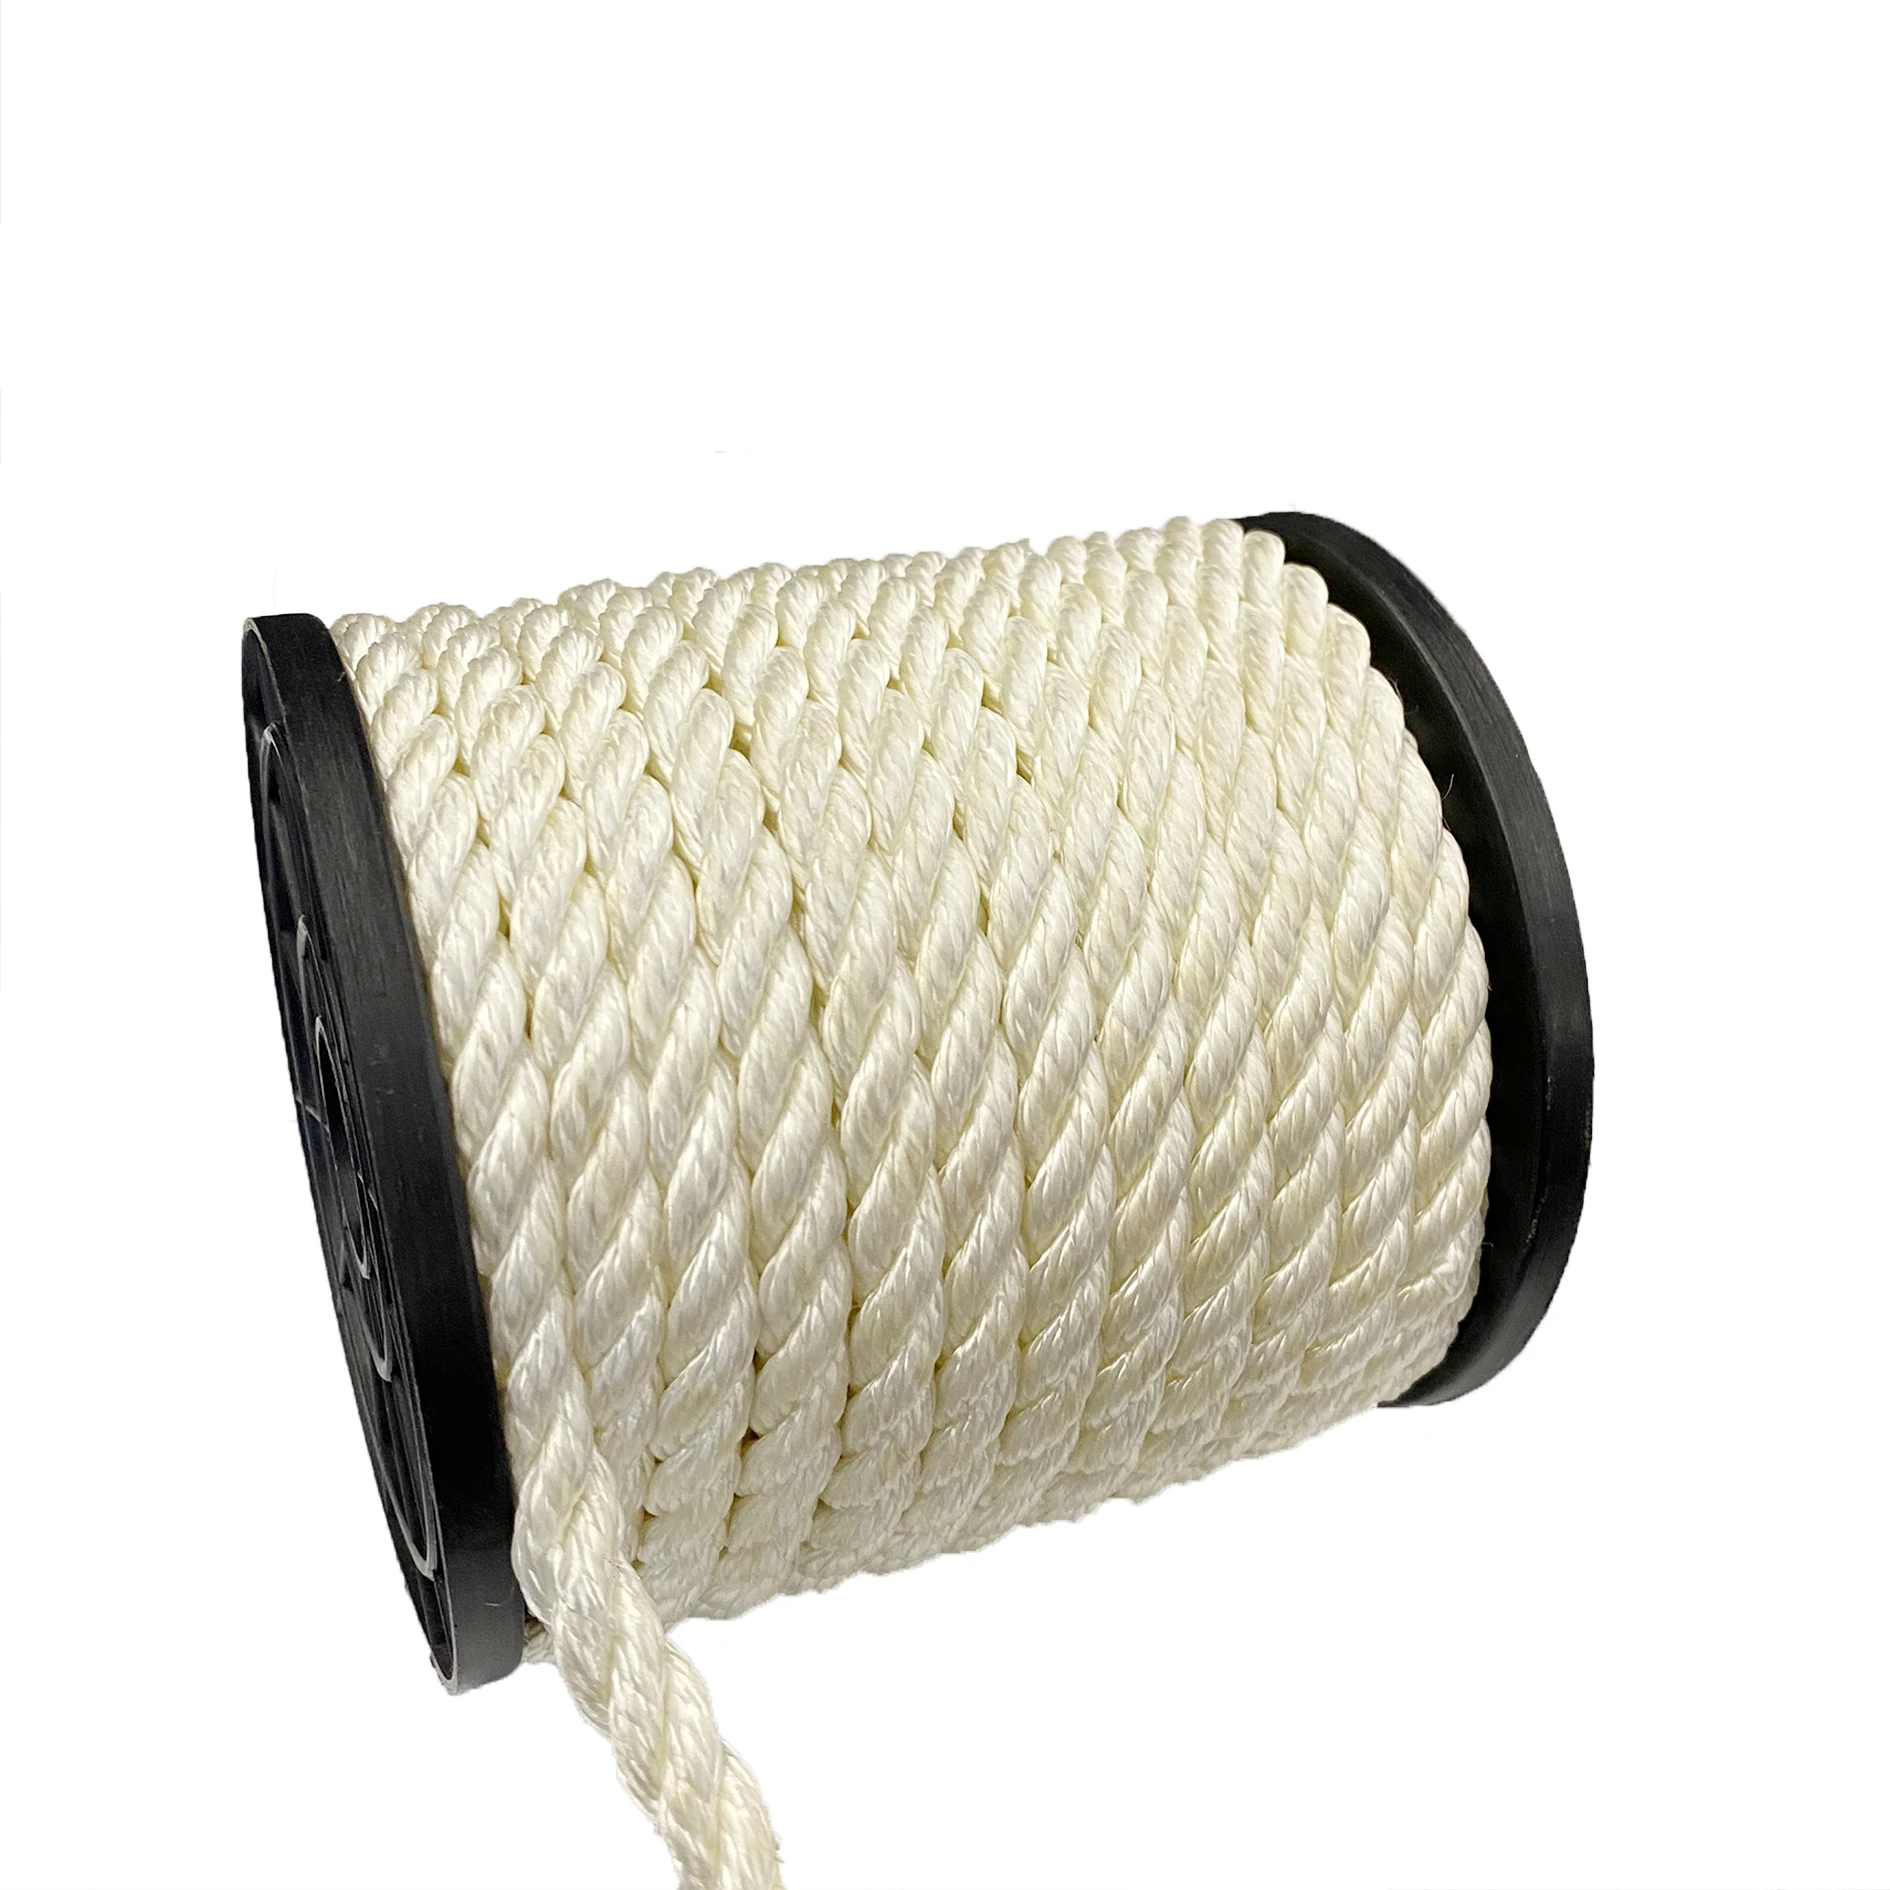 Manufacturer direct sale nylon 3-Strand Twisted Hdpe Fishing Net Rope